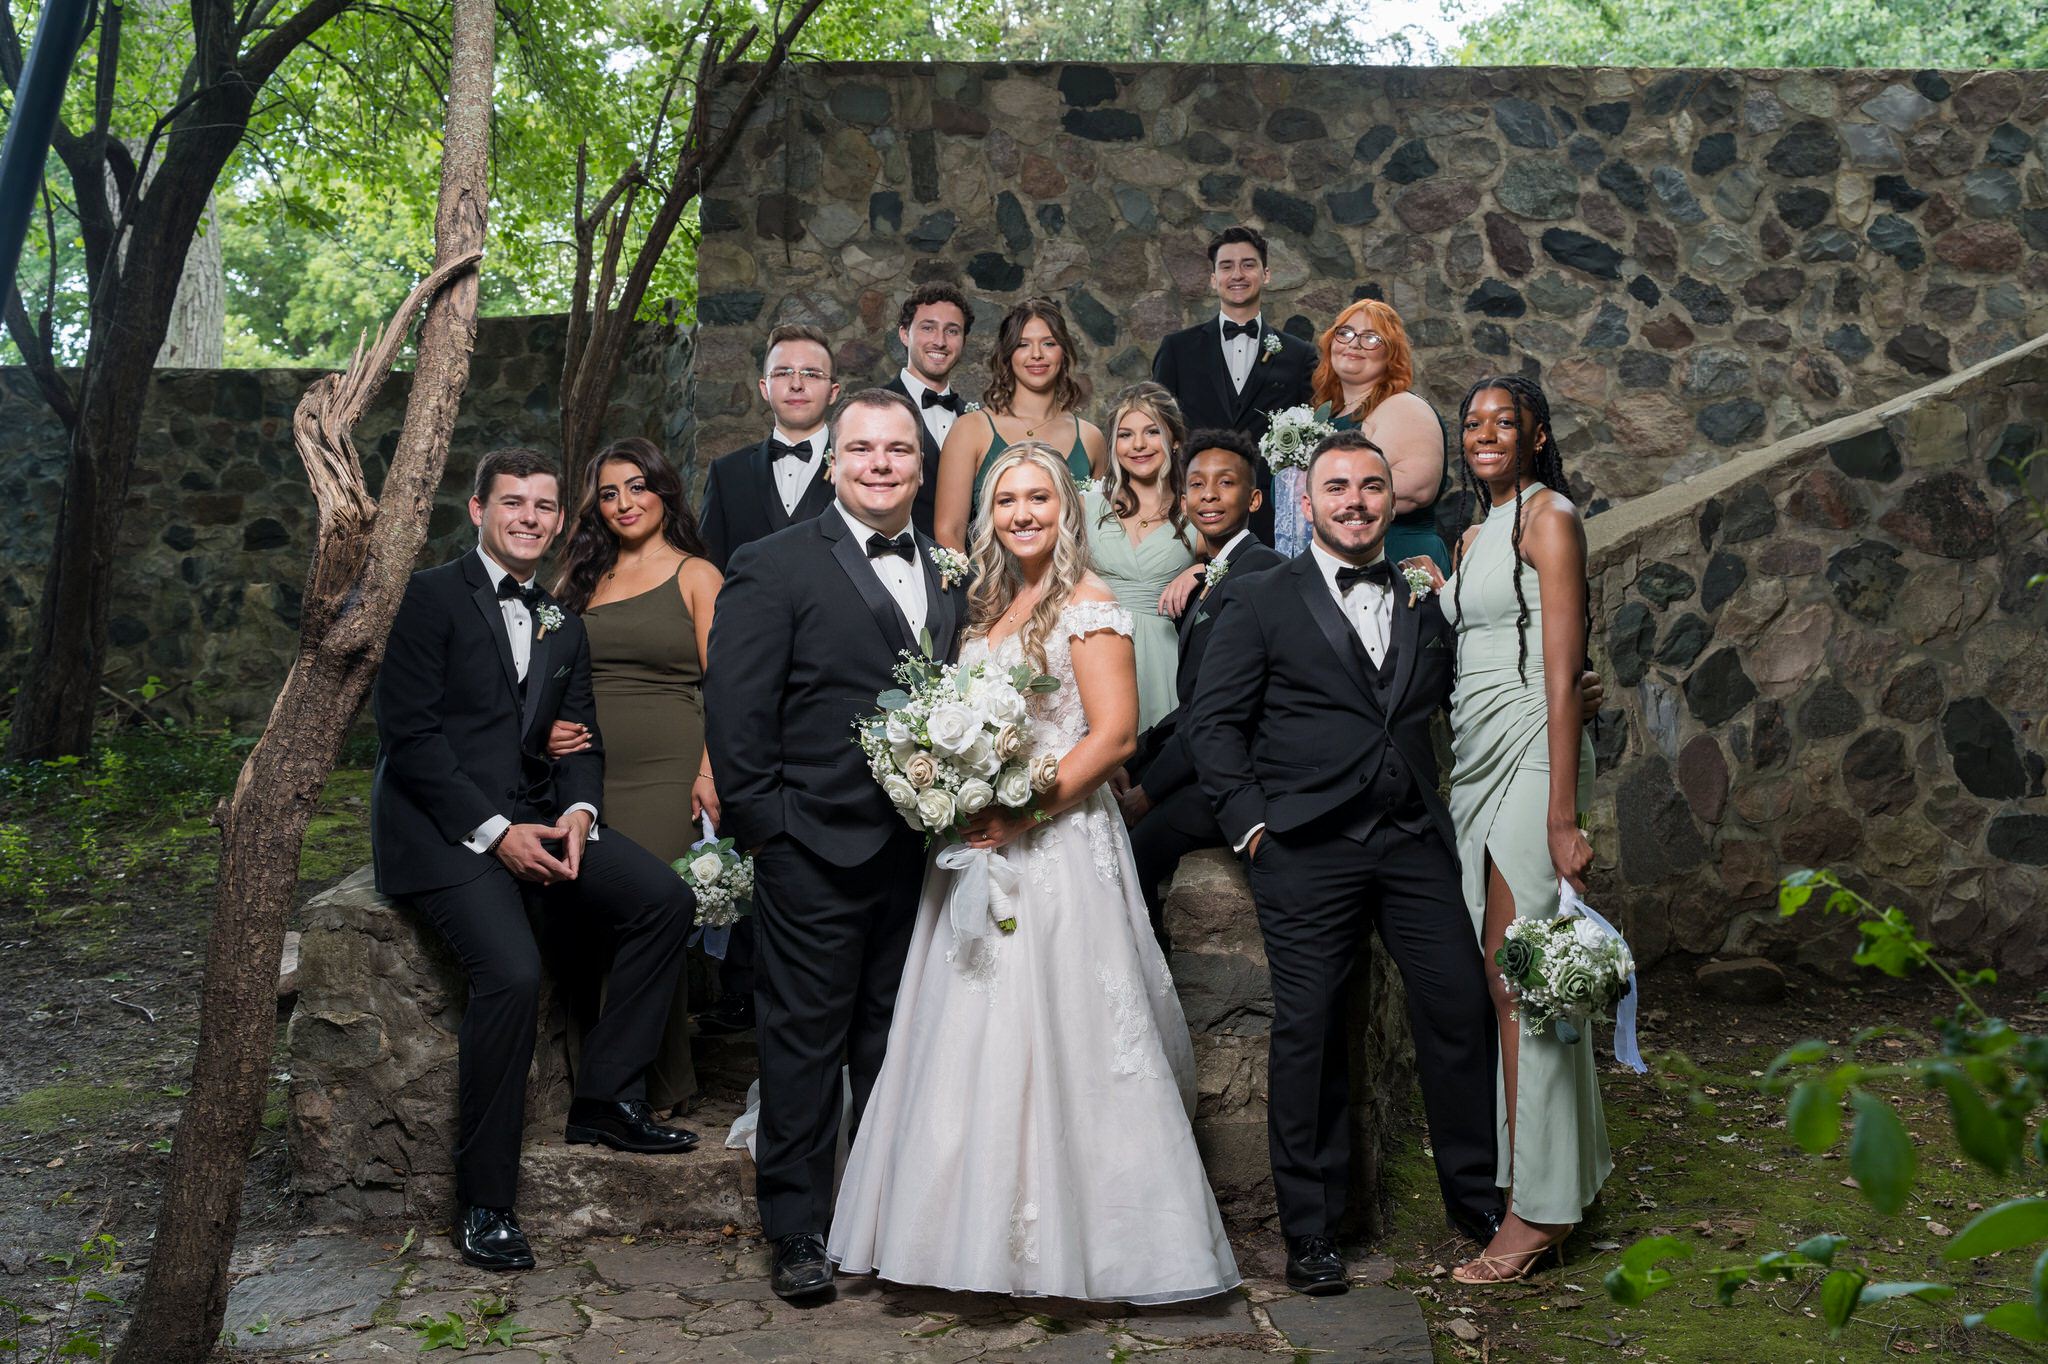 The bridal party poses for a formal photo along a stone wall at a Stony Creek wedding in Shelby Township, MI.   